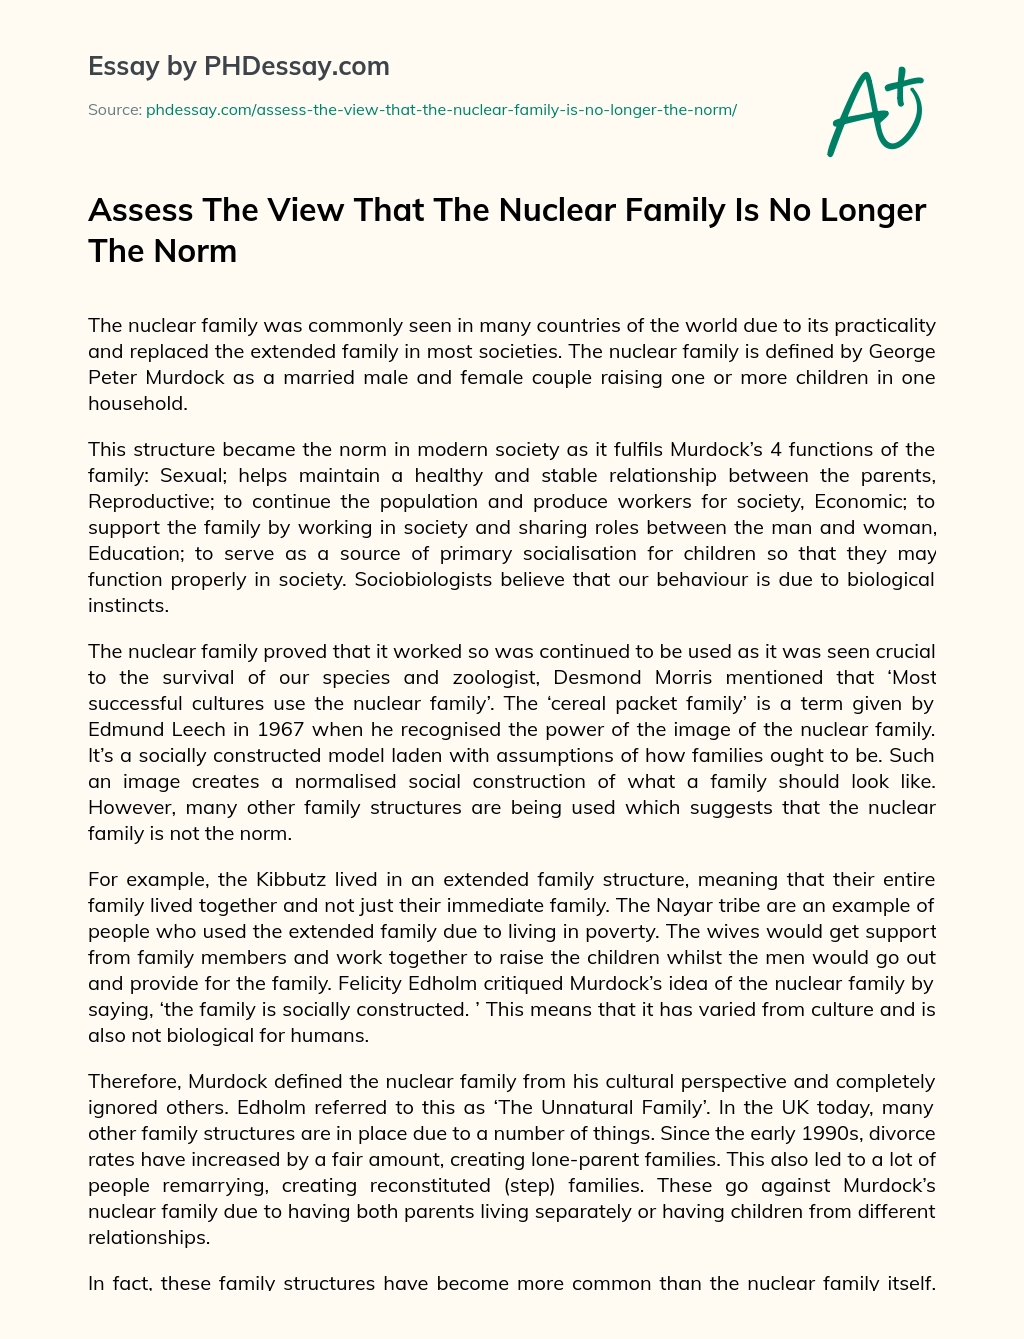 Assess The View That The Nuclear Family Is No Longer The Norm essay